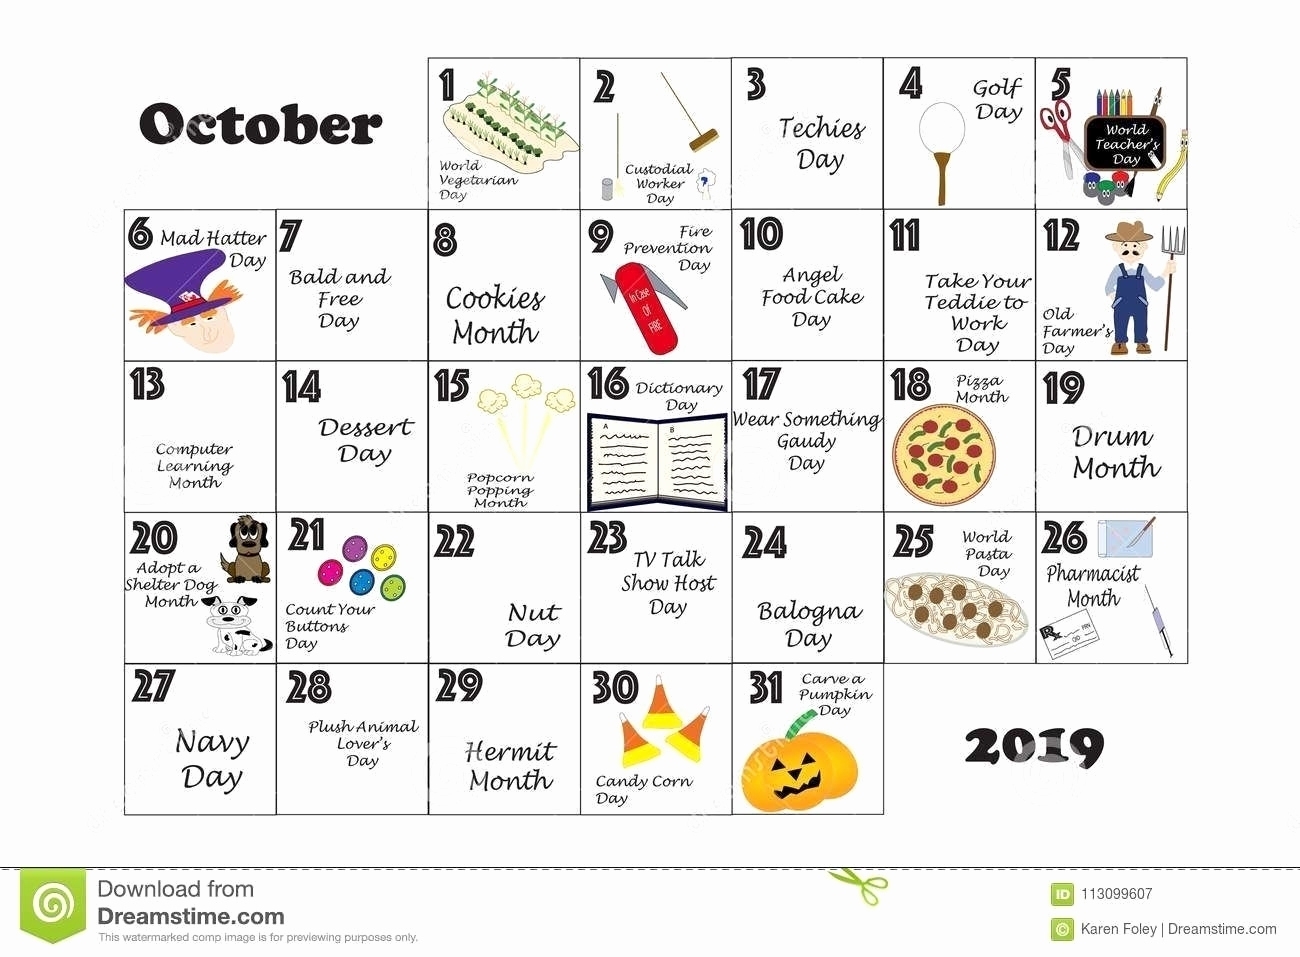 National Day Calendar 2019 National Day Calendar 2019 October in National Days Of The Year Calendar